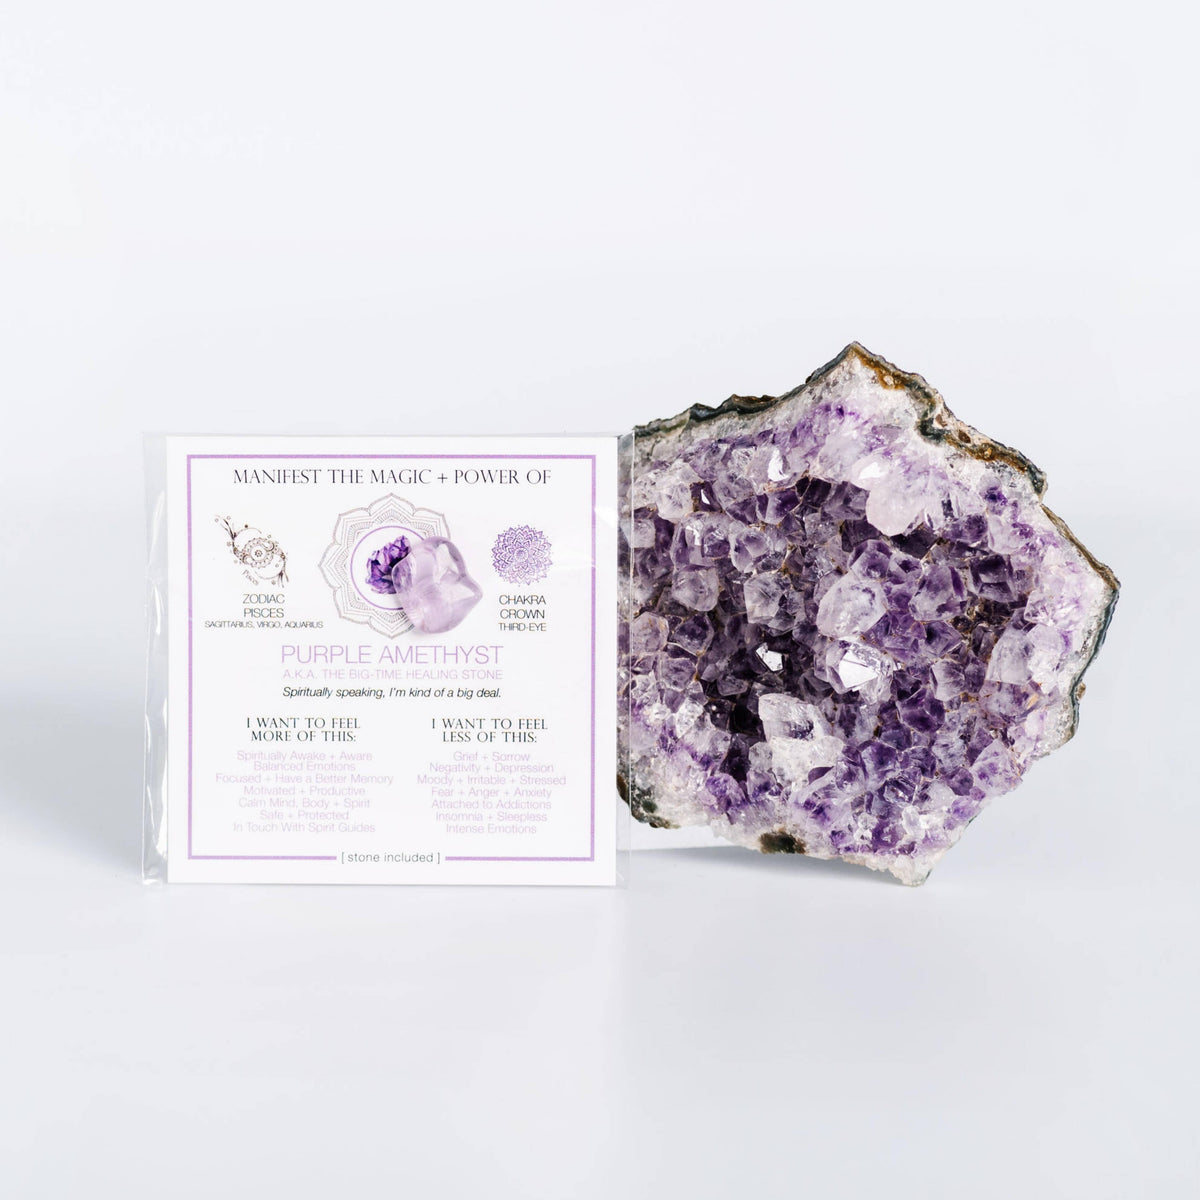 MANIFEST THE MAGIC + POWER OF YOUR CRYSTAL PURPLE AMETHYST